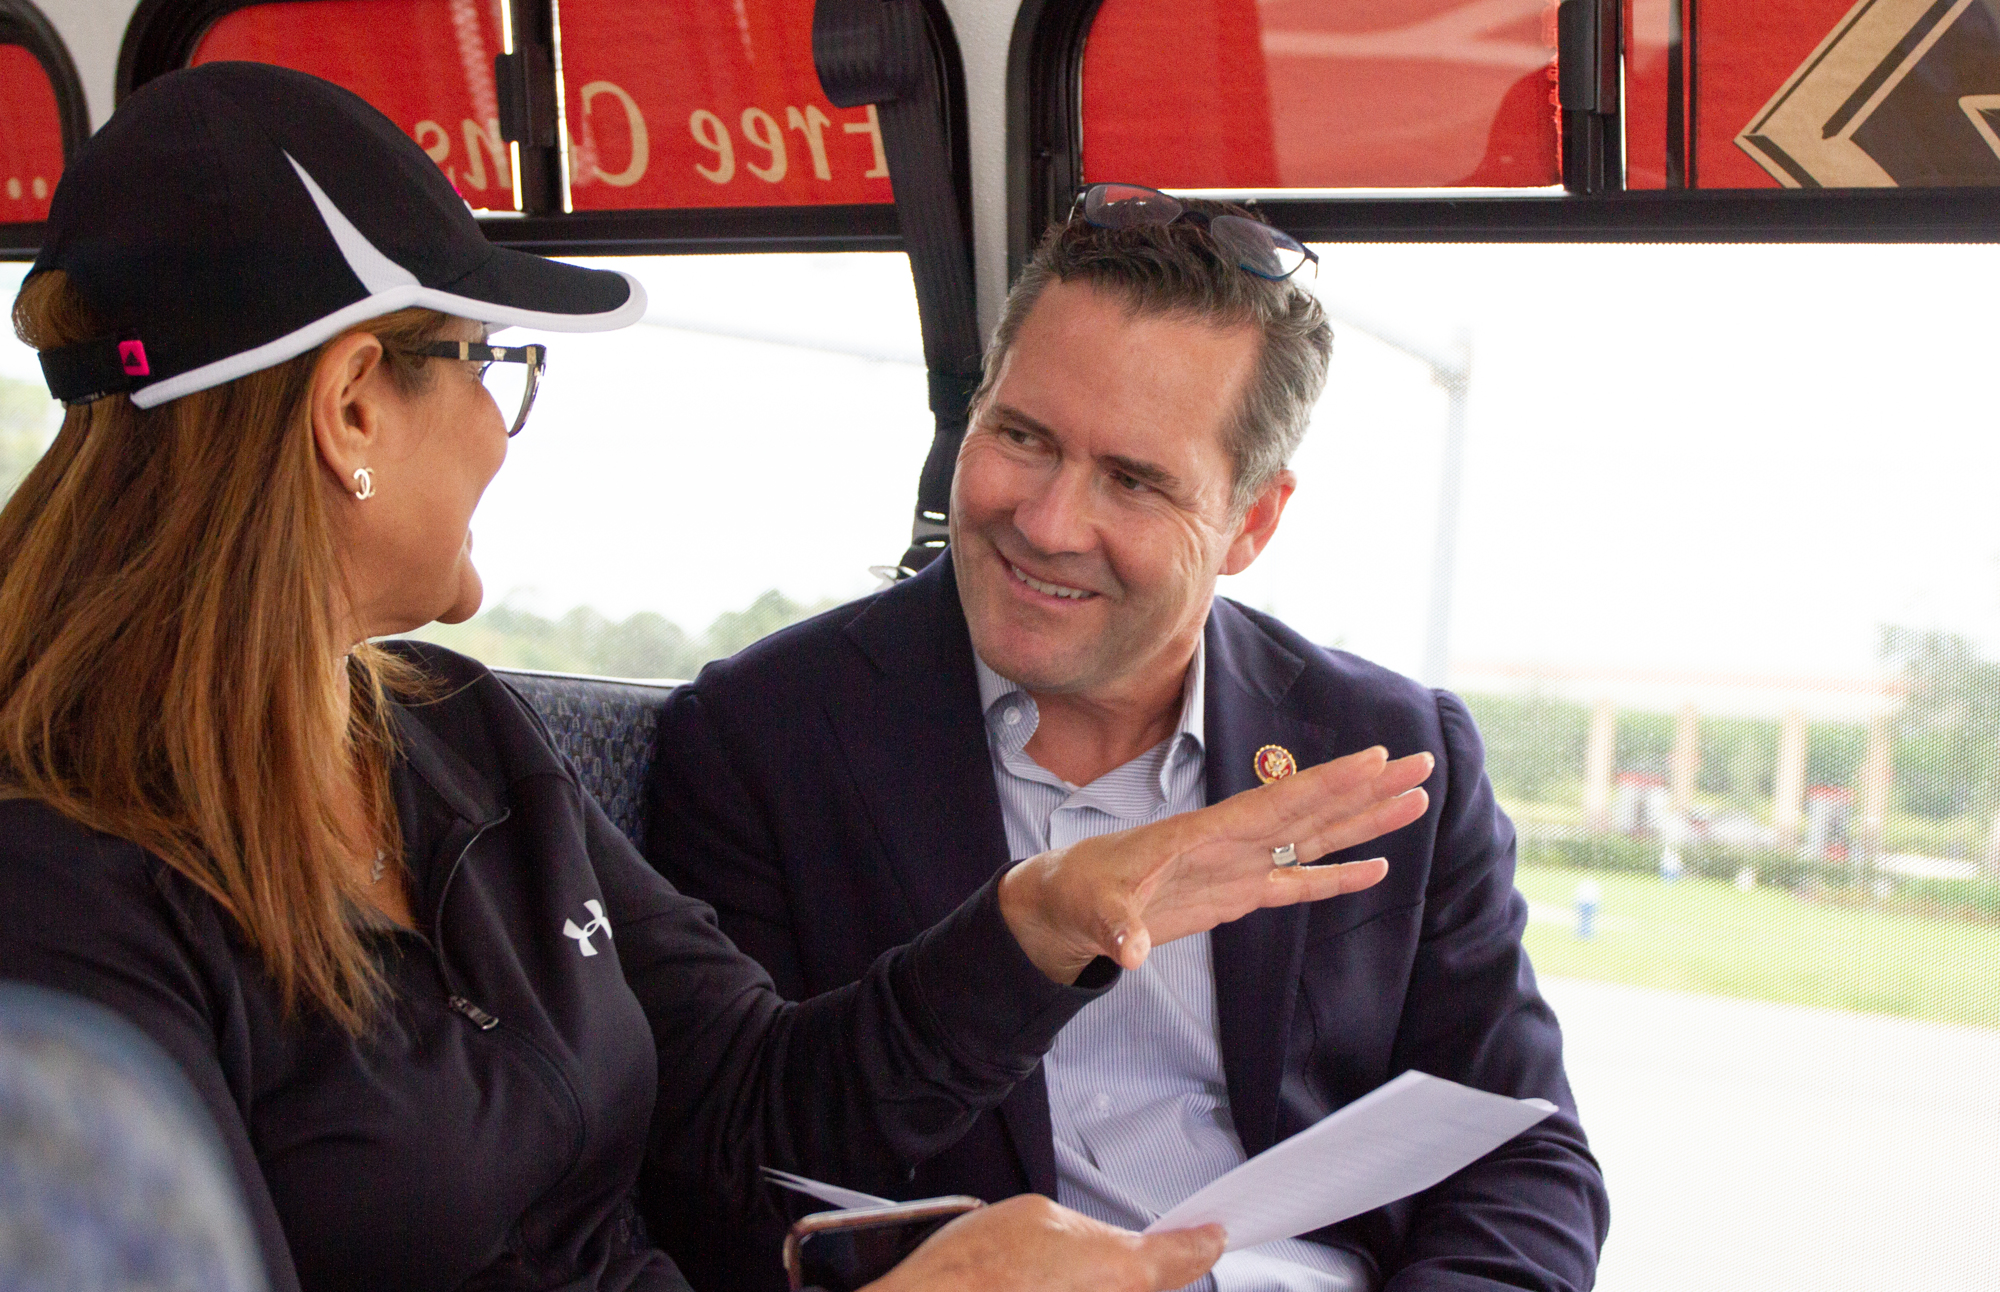 County Engineer Faith al-Khatib starts updating Congressman Waltz in the tour bus. Photo by Paola Rodriguez